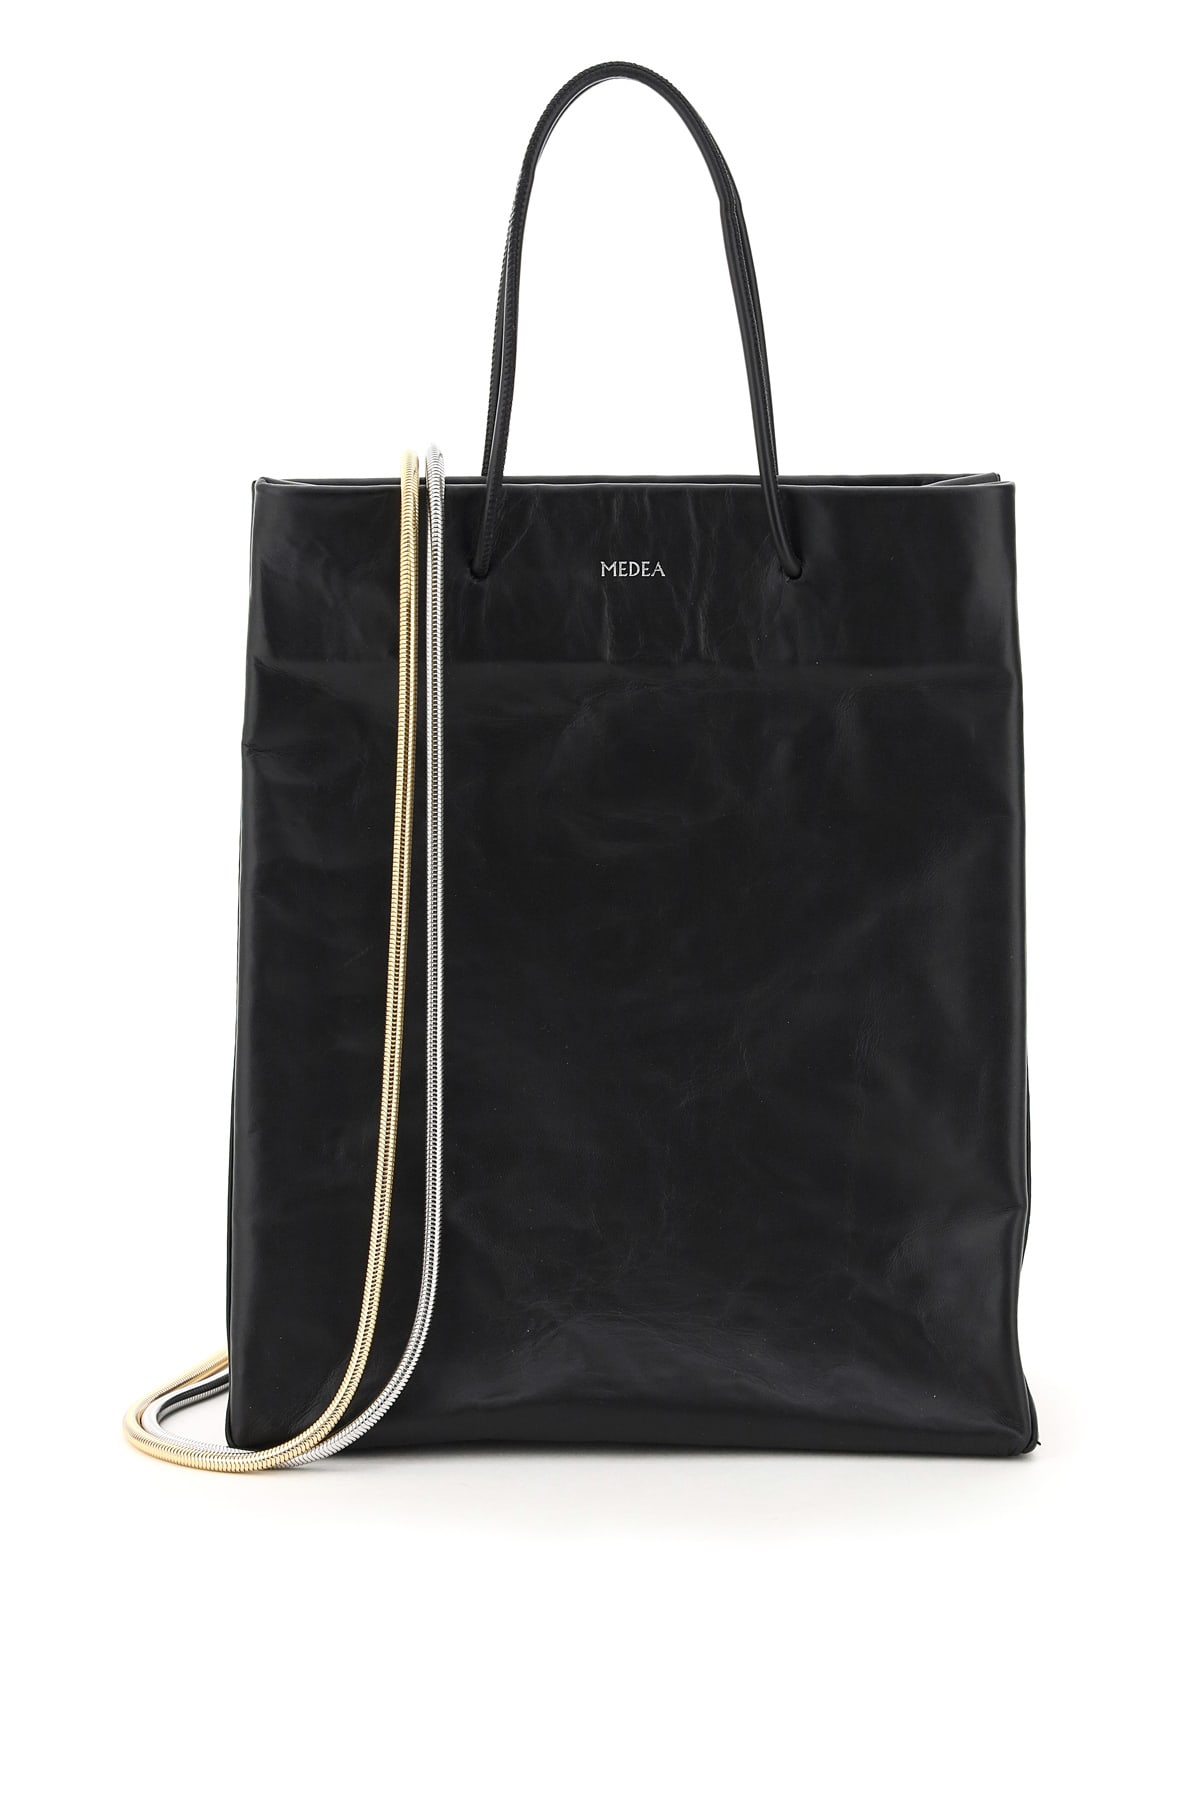 Medea Busted Tall Leather Tote